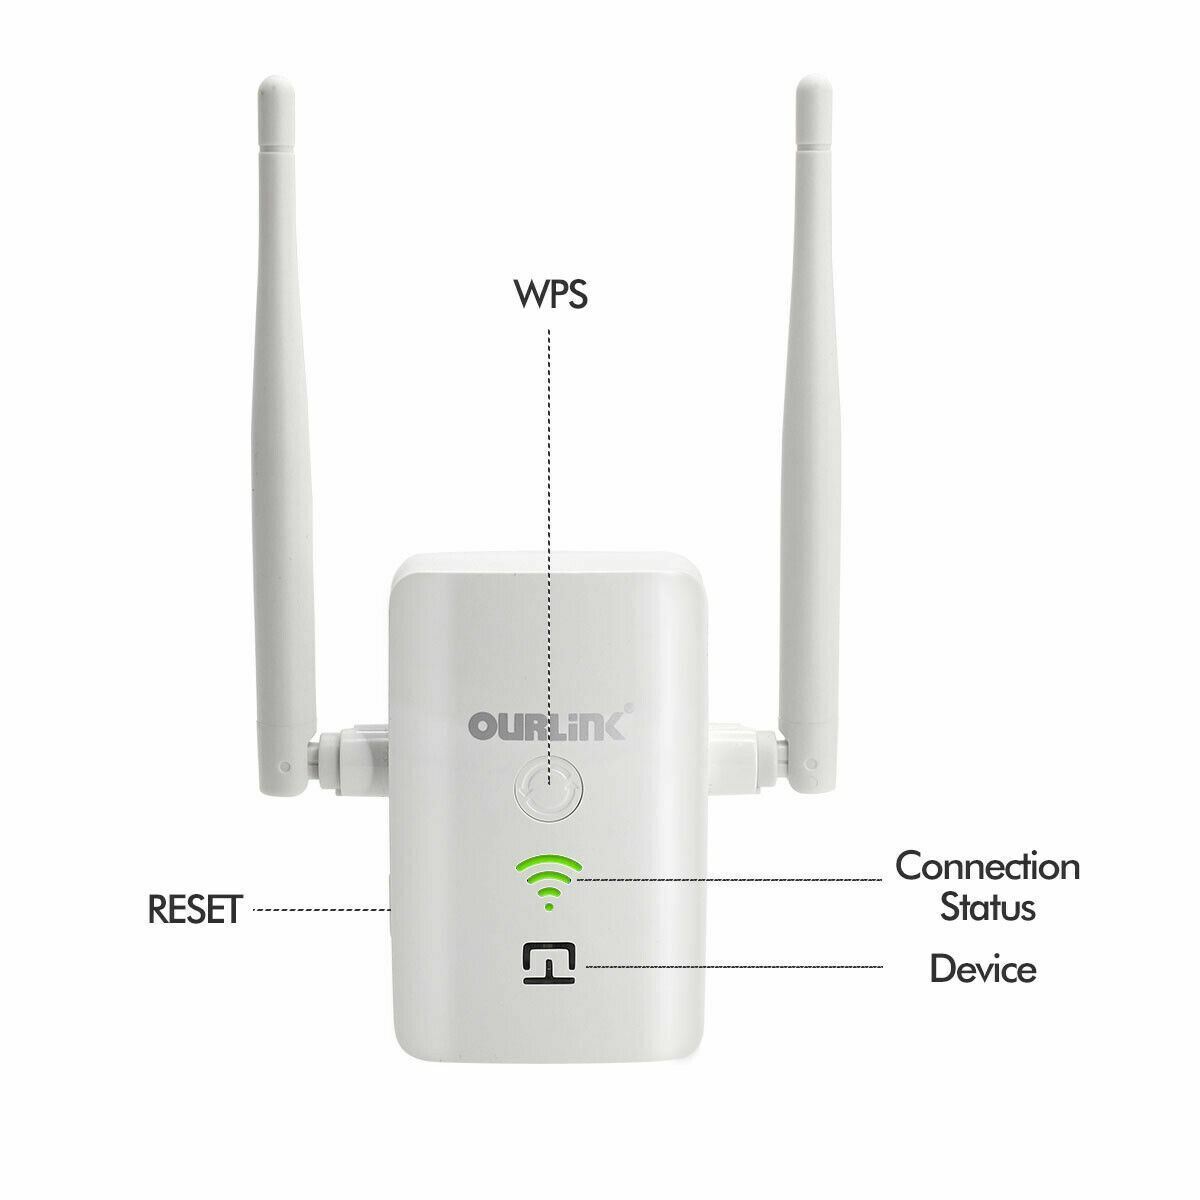 1200Mbps WiFi Range Extender Repeater Wireless Amplifier Router Signal Booster A